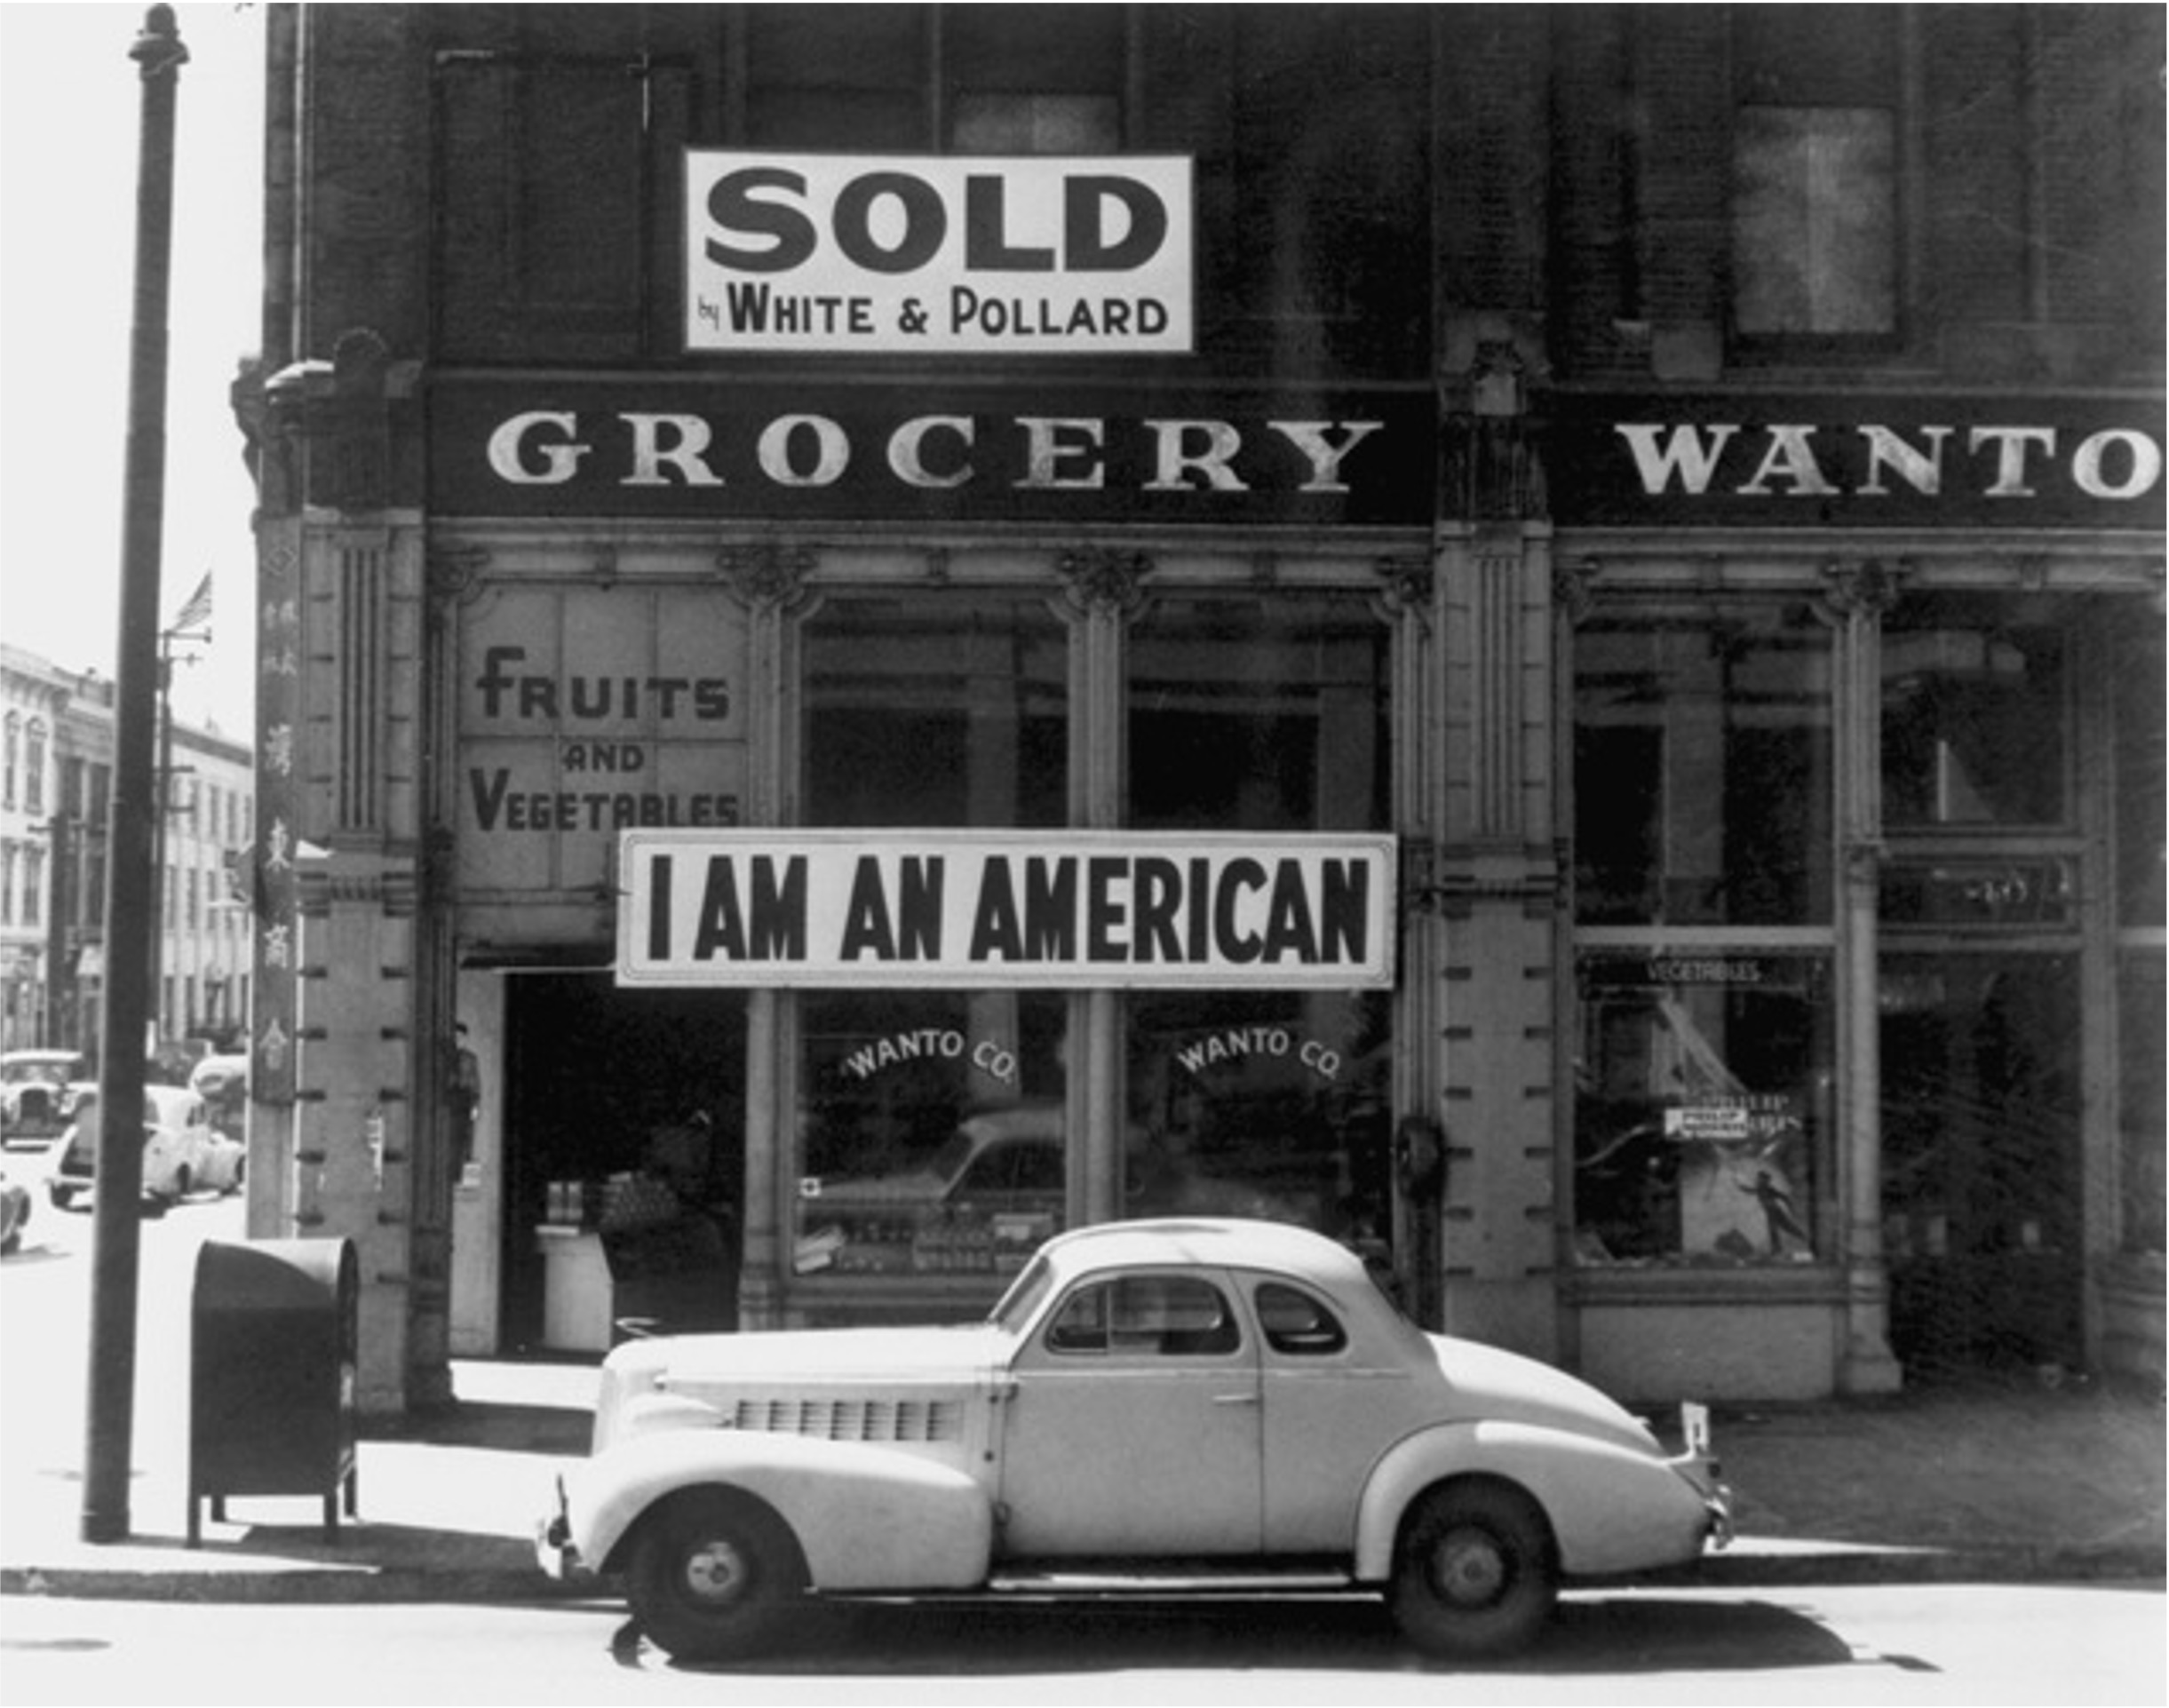 a 1930s coupe automobile sits in front of a grocer with a sign above that says "I am an American" and another that says "sold"